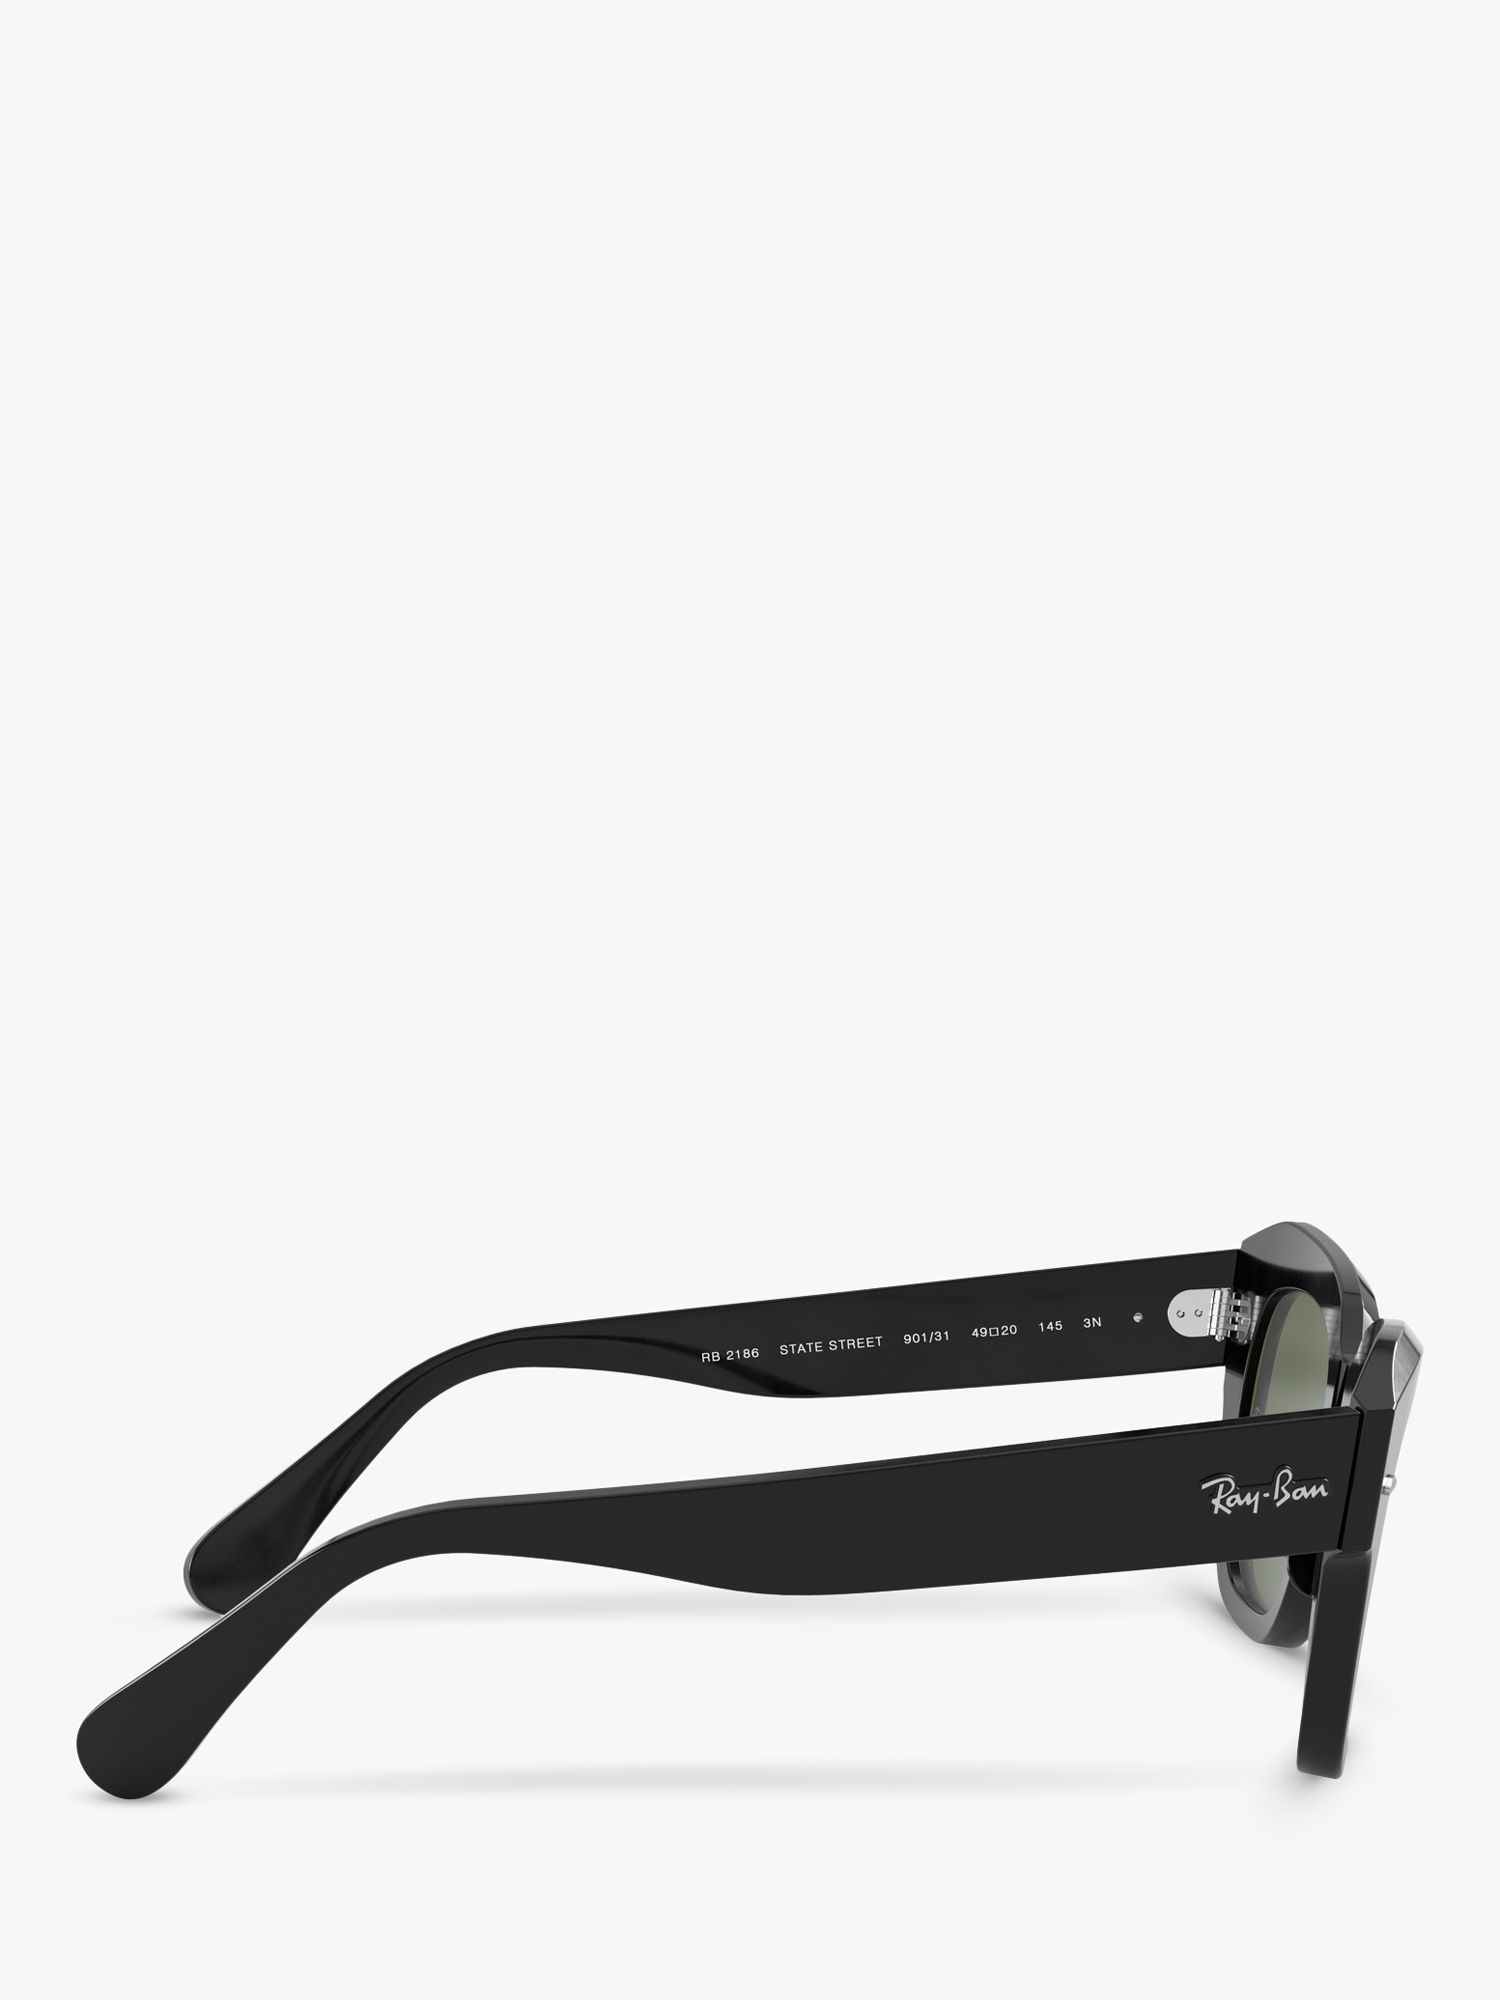 Buy Ray-Ban RB2186 Unisex Square Sunglasses, Black Online at johnlewis.com